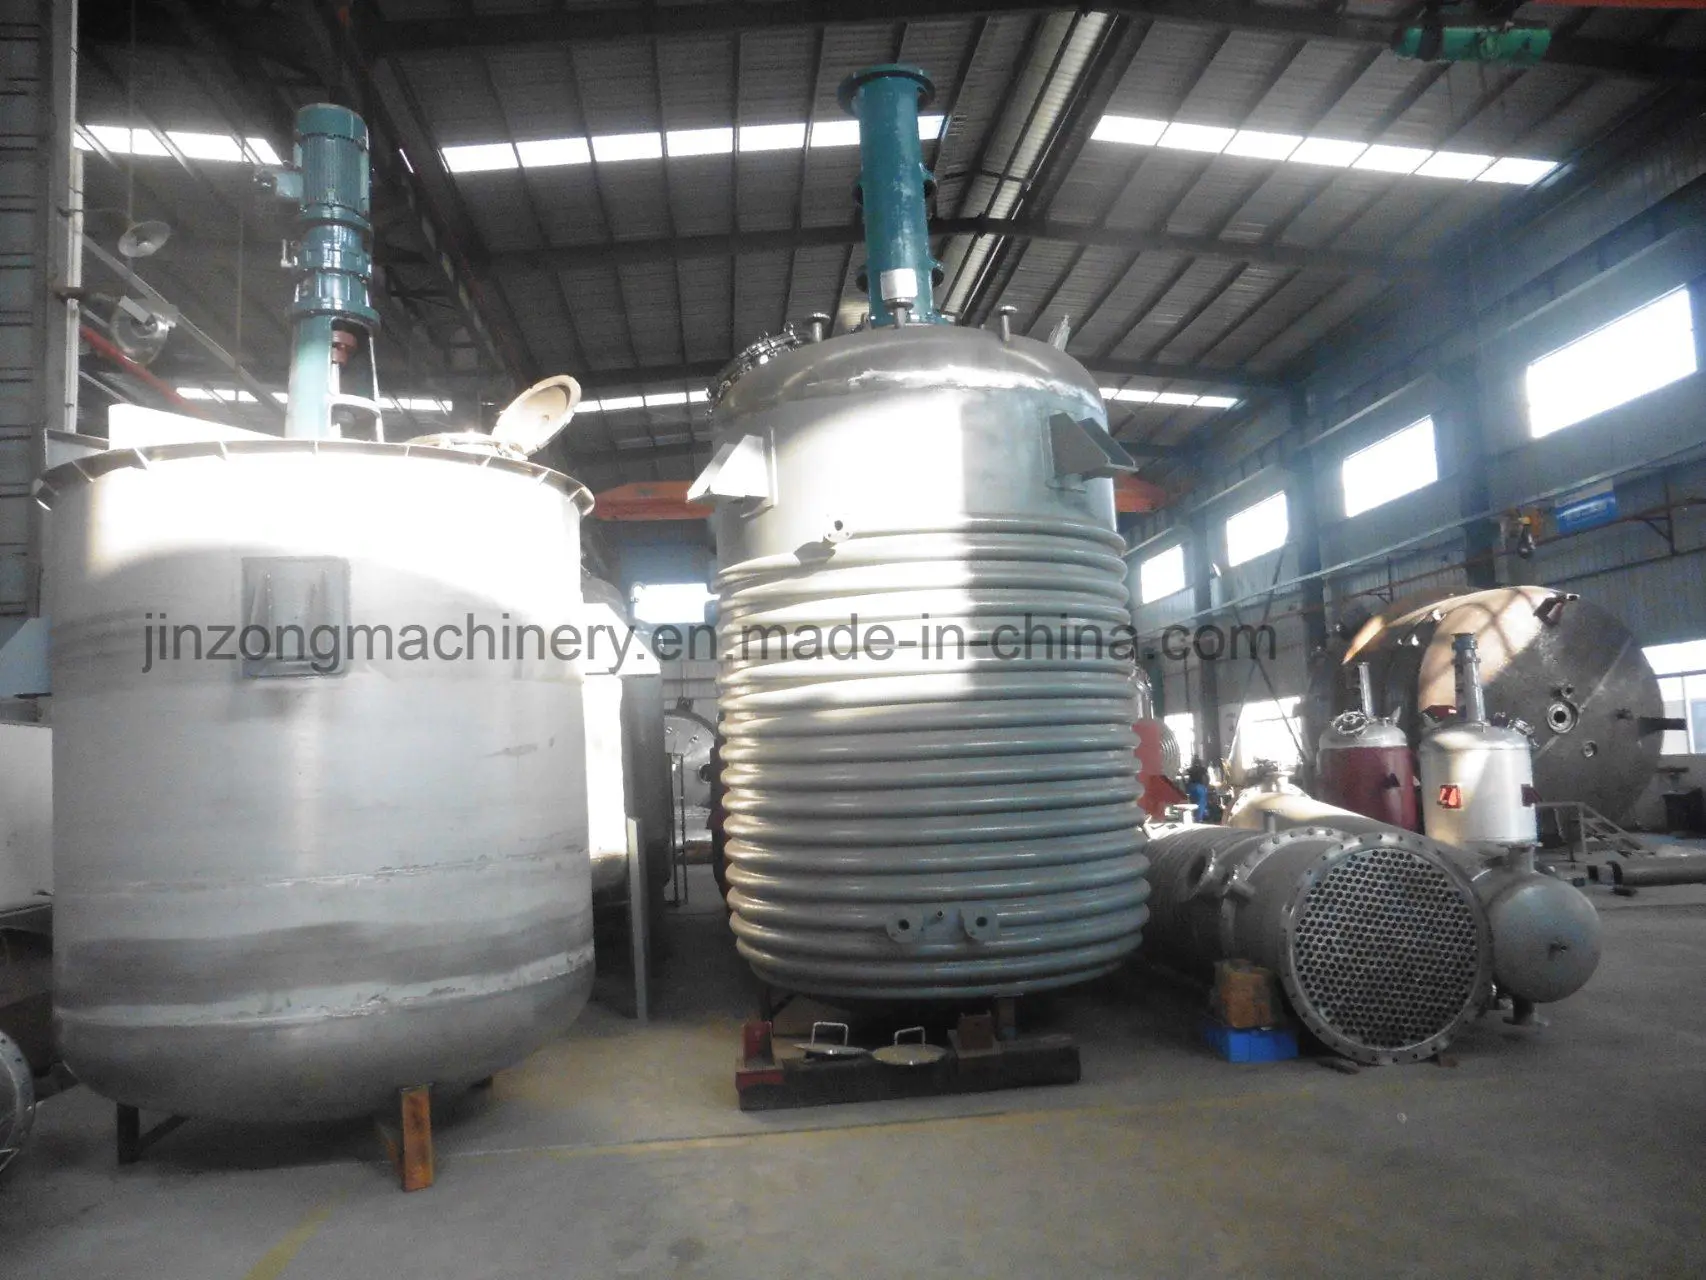 2000L Chemical Reactor with Jacket Heating/Cooling